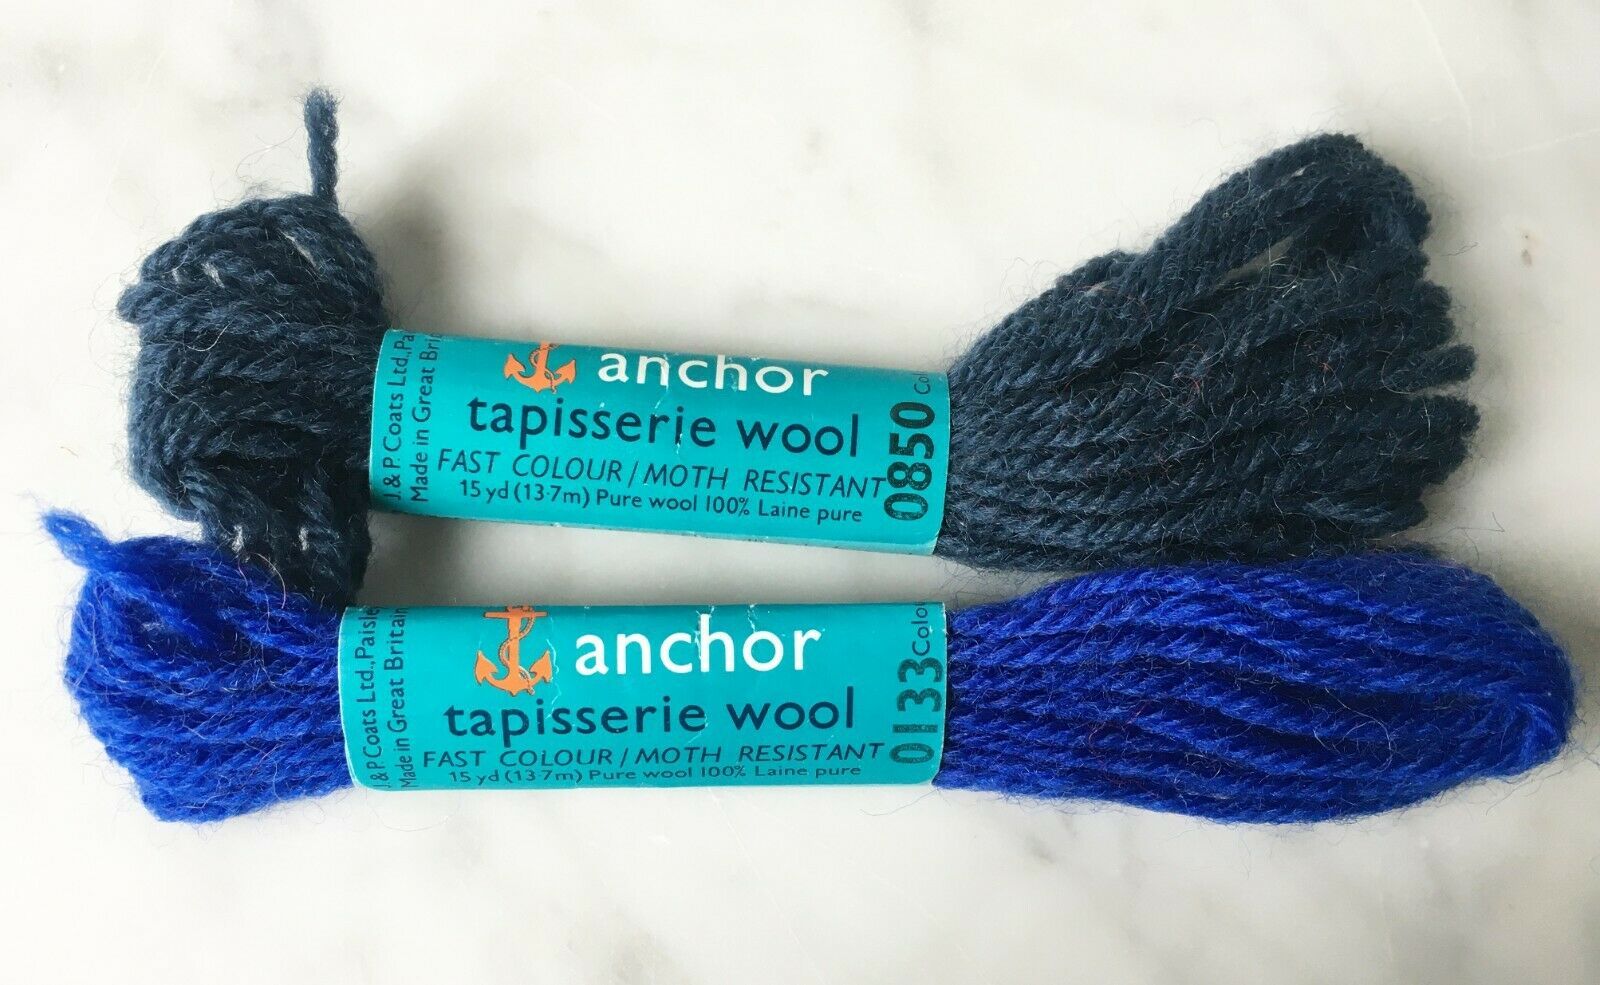 Anchor Tapisserie Wool Persian Crewel Tapestry Yarn - 2 Skeins Blue #133 #850 - $2.61